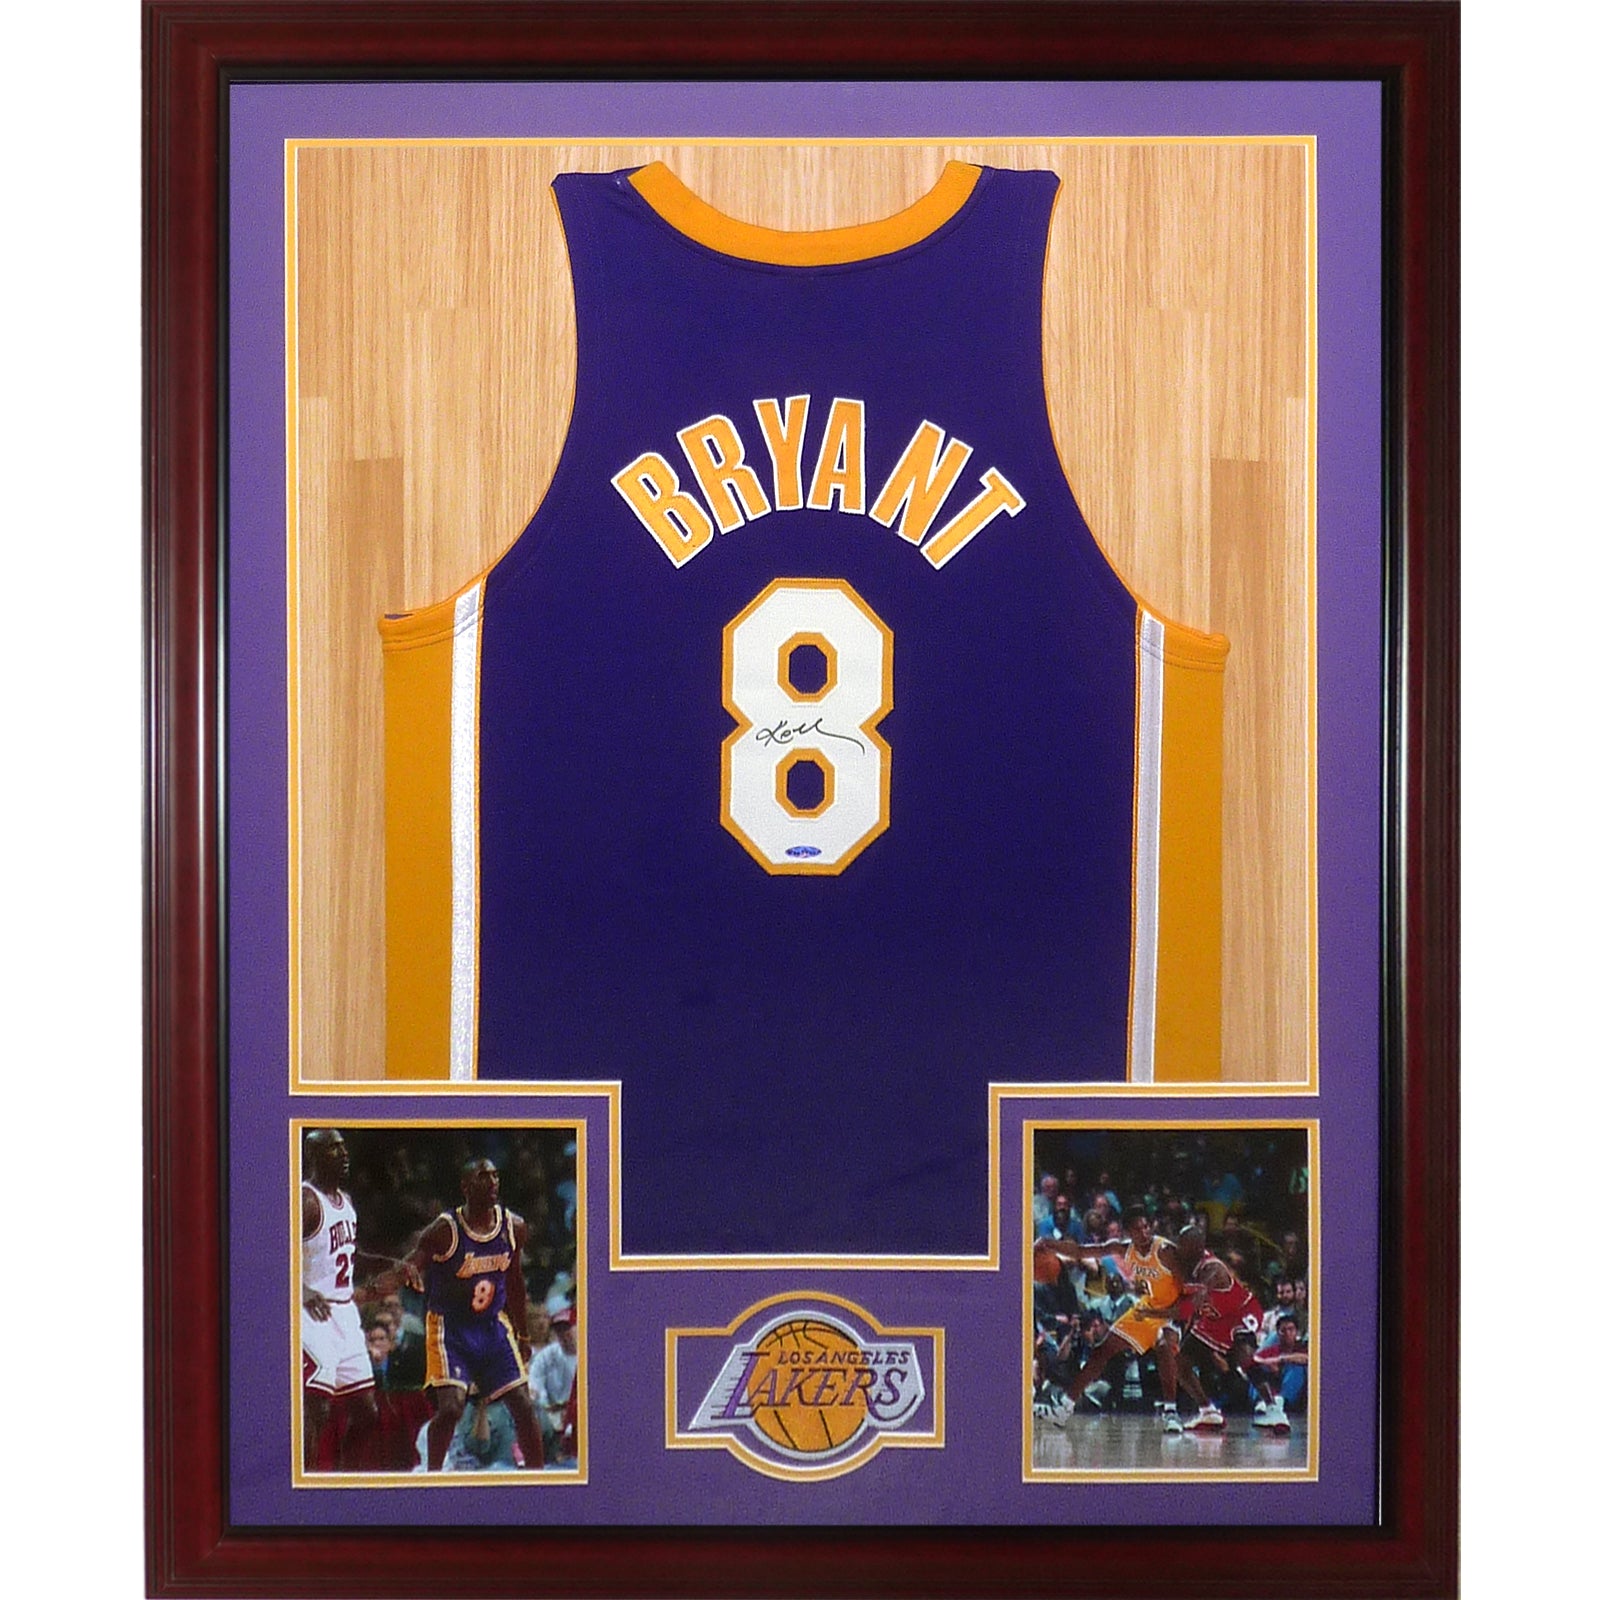 Kobe Bryant Autographed Los Angeles Lakers (Purple #8) Deluxe Framed Jersey - UDA Upper Deck